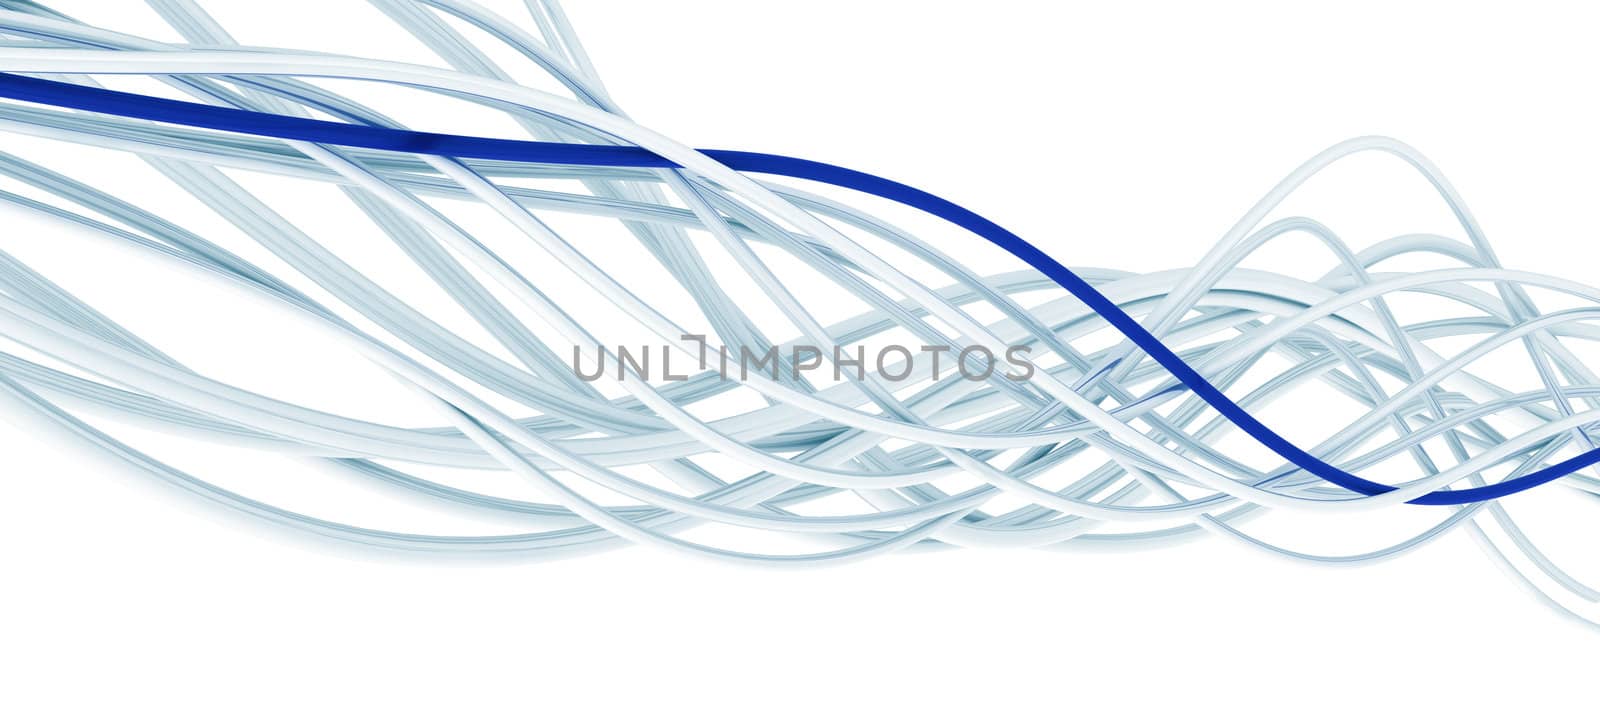 bright metallic fibre-optical blue and white cables on a white background by Serp